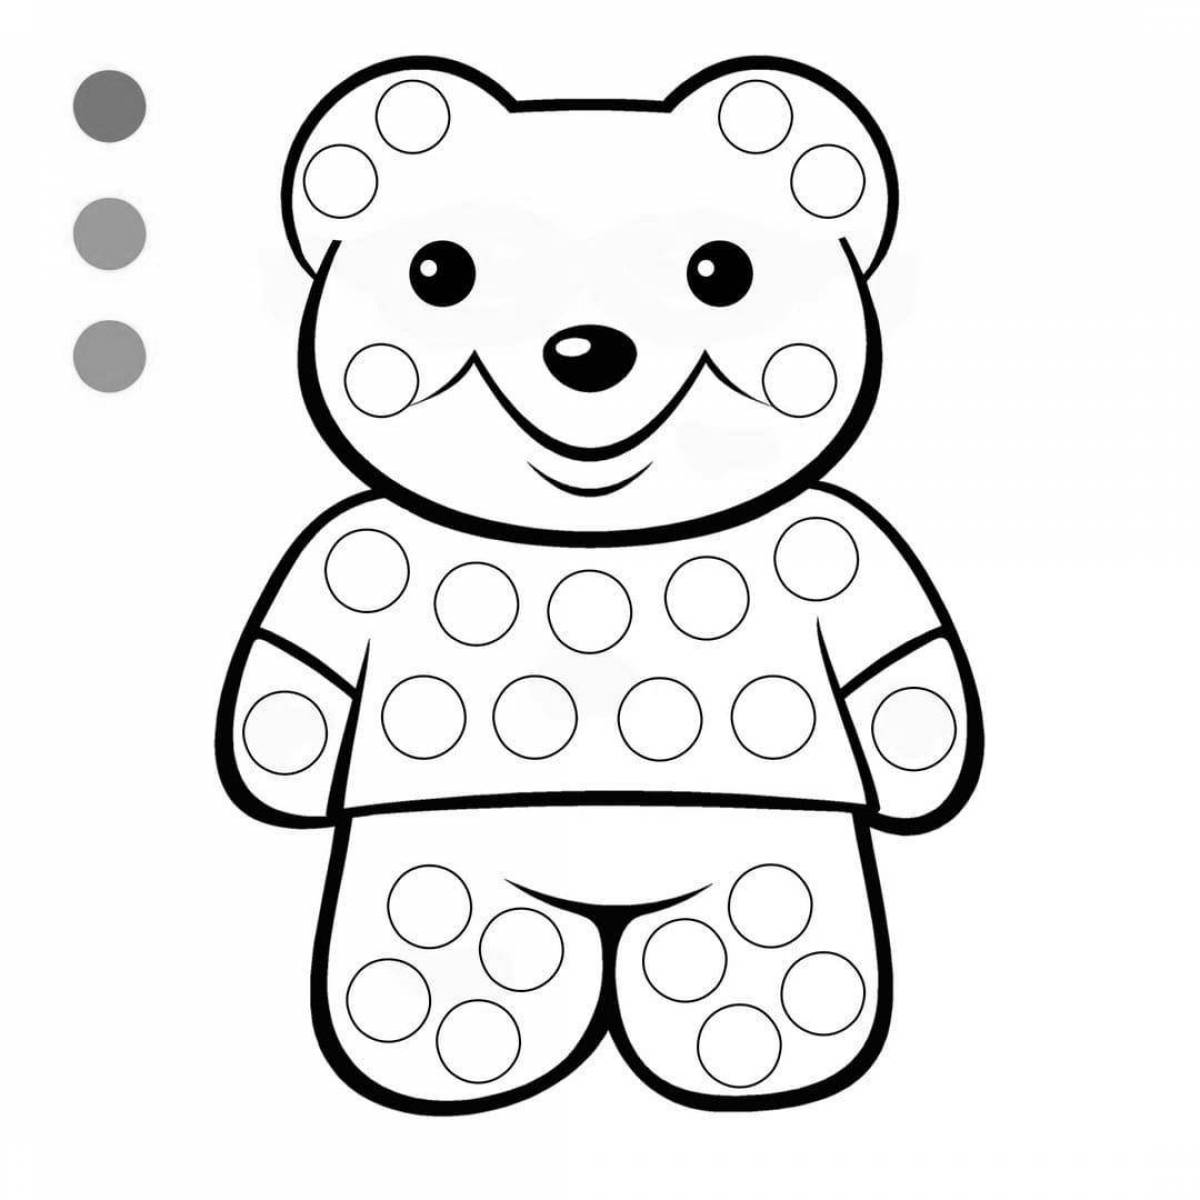 Colorful Toddler Finger Coloring Page